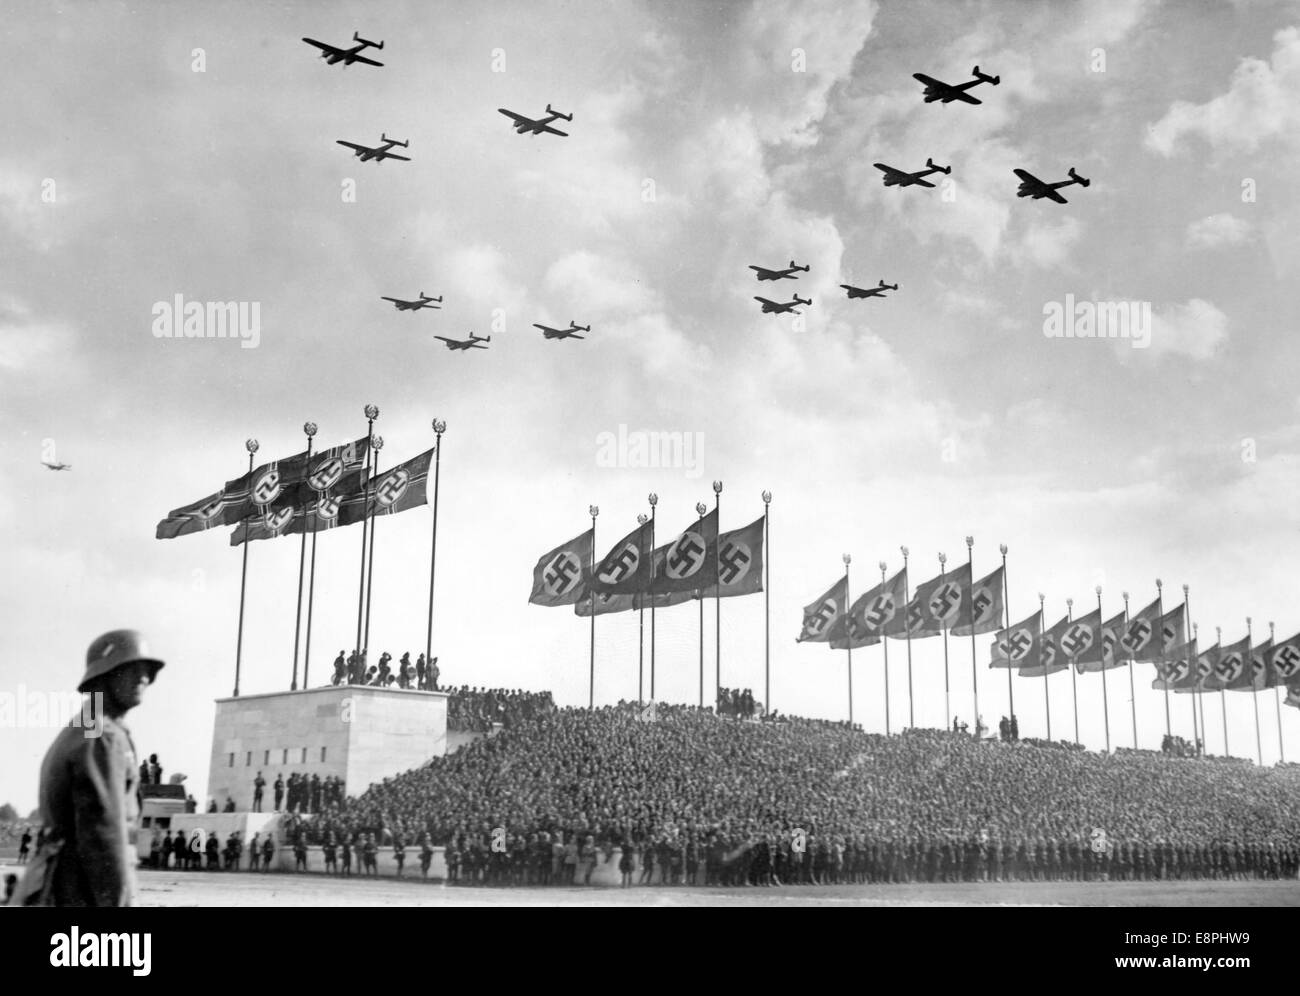 Nuremberg Rally 1937 in Nuremberg, Germany - Display of the Nazi armed forces (Wehrmacht) on Zeppelin Field at the Nazi party rally grounds, here the air force (Luftwaffe). (Flaws in quality due to the historic picture copy) Fotoarchiv für Zeitgeschichtee - NO WIRE SERVICE - Stock Photo